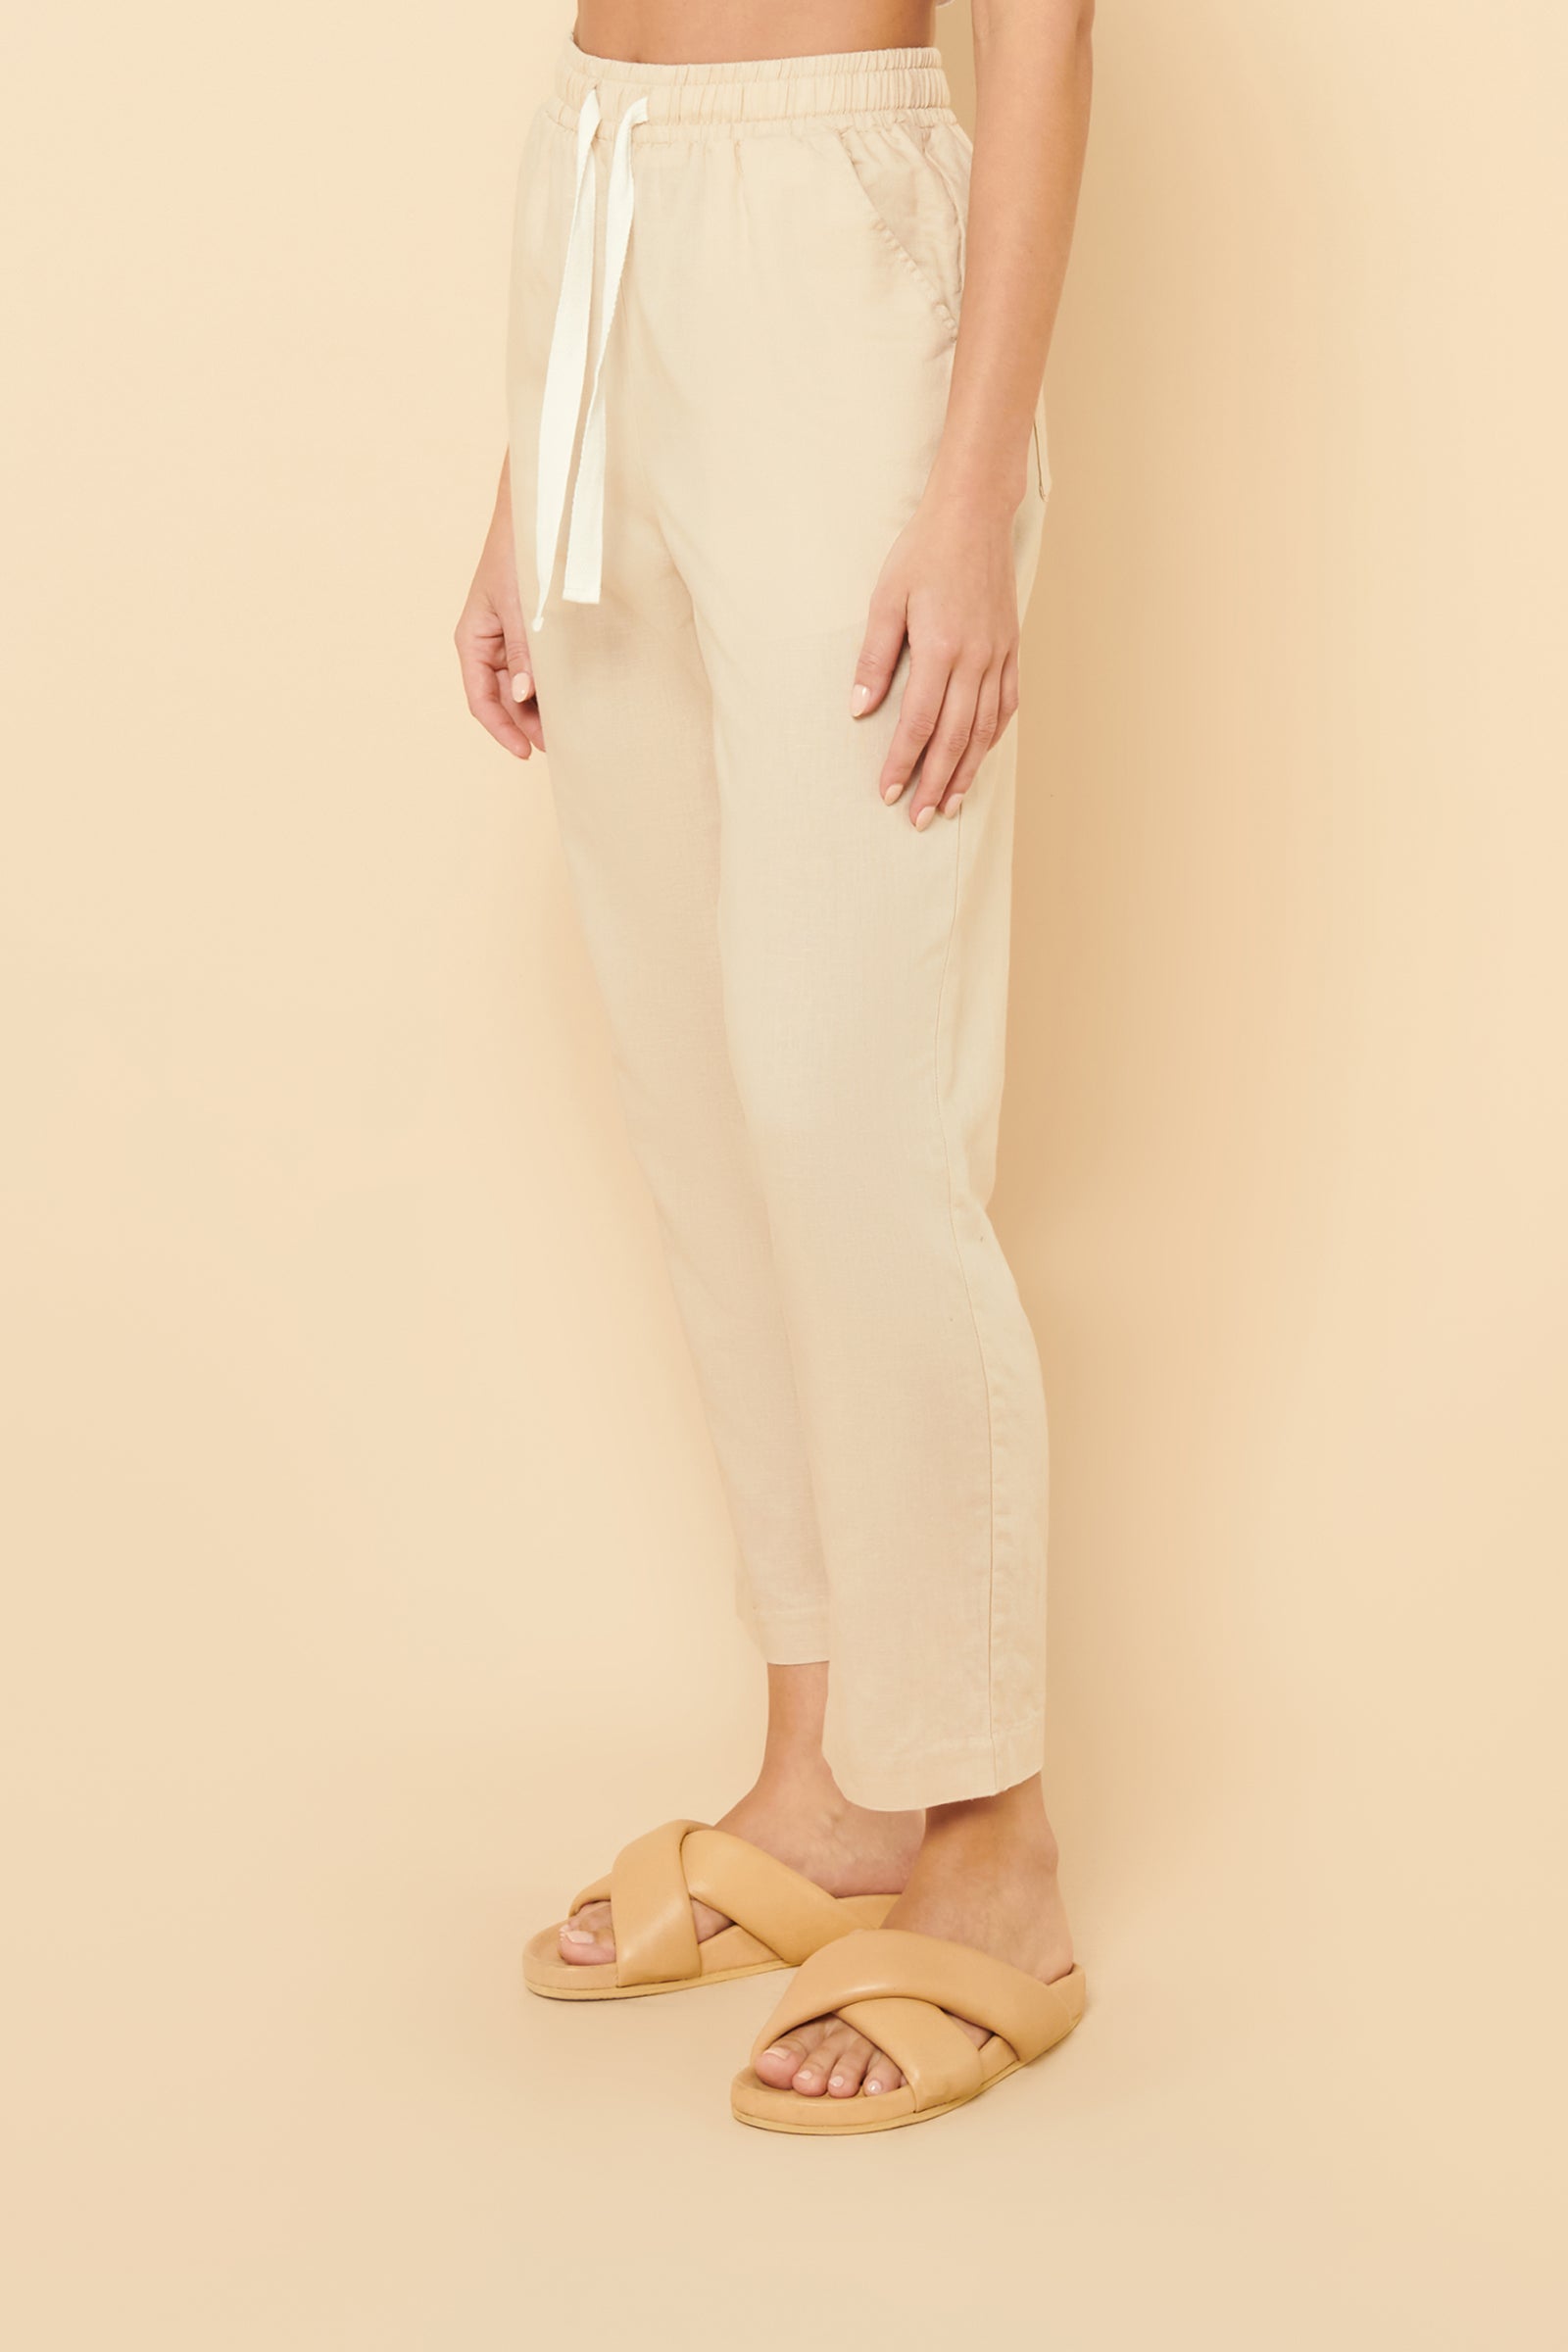 Nude Lucy Nude Classic Pant In a Yellow Sand Colour